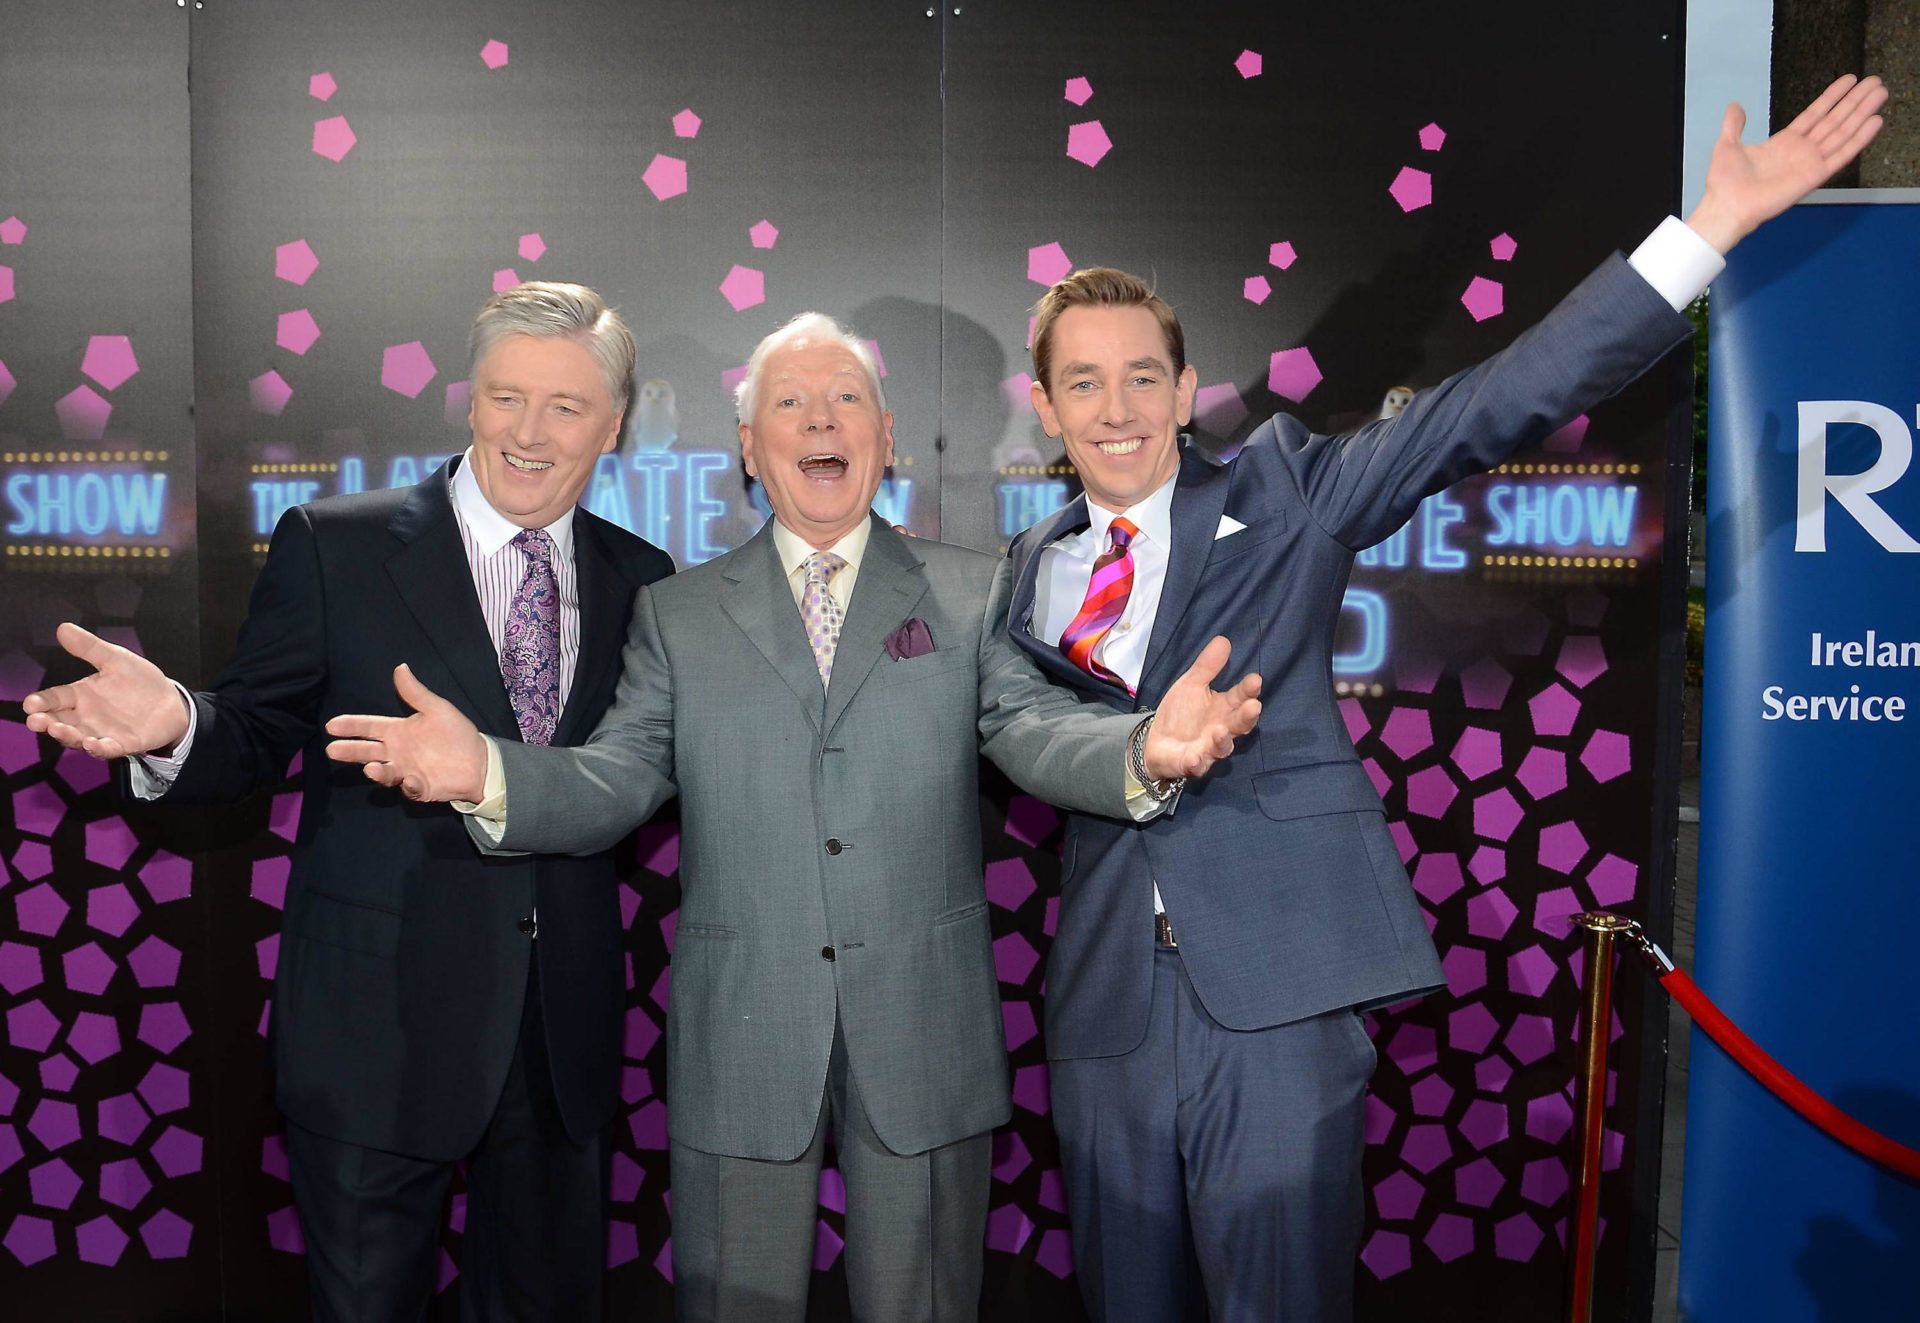 Pat Kenny with fellow Late Late Show presenters Ryan Tubridy and Gay Byrne